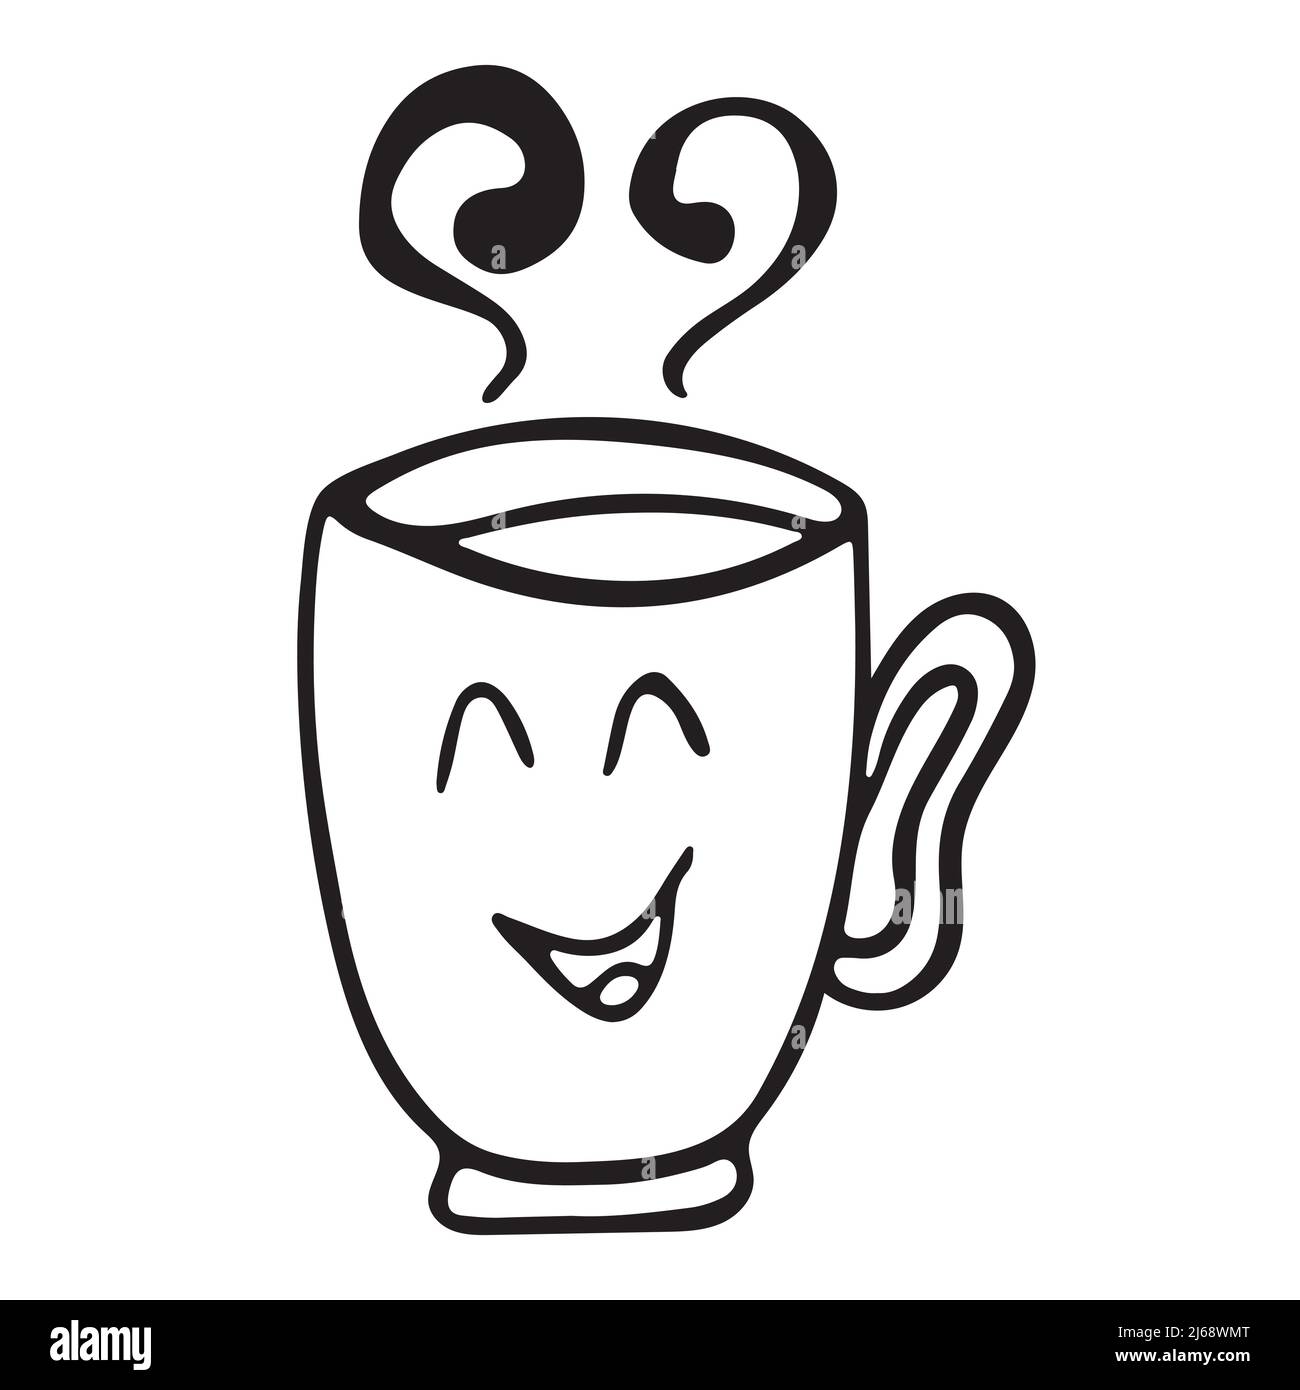 https://c8.alamy.com/comp/2J68WMT/cute-hot-tea-or-coffee-cup-with-smile-face-vector-doodle-hand-drawn-line-illustration-doodle-style-2J68WMT.jpg